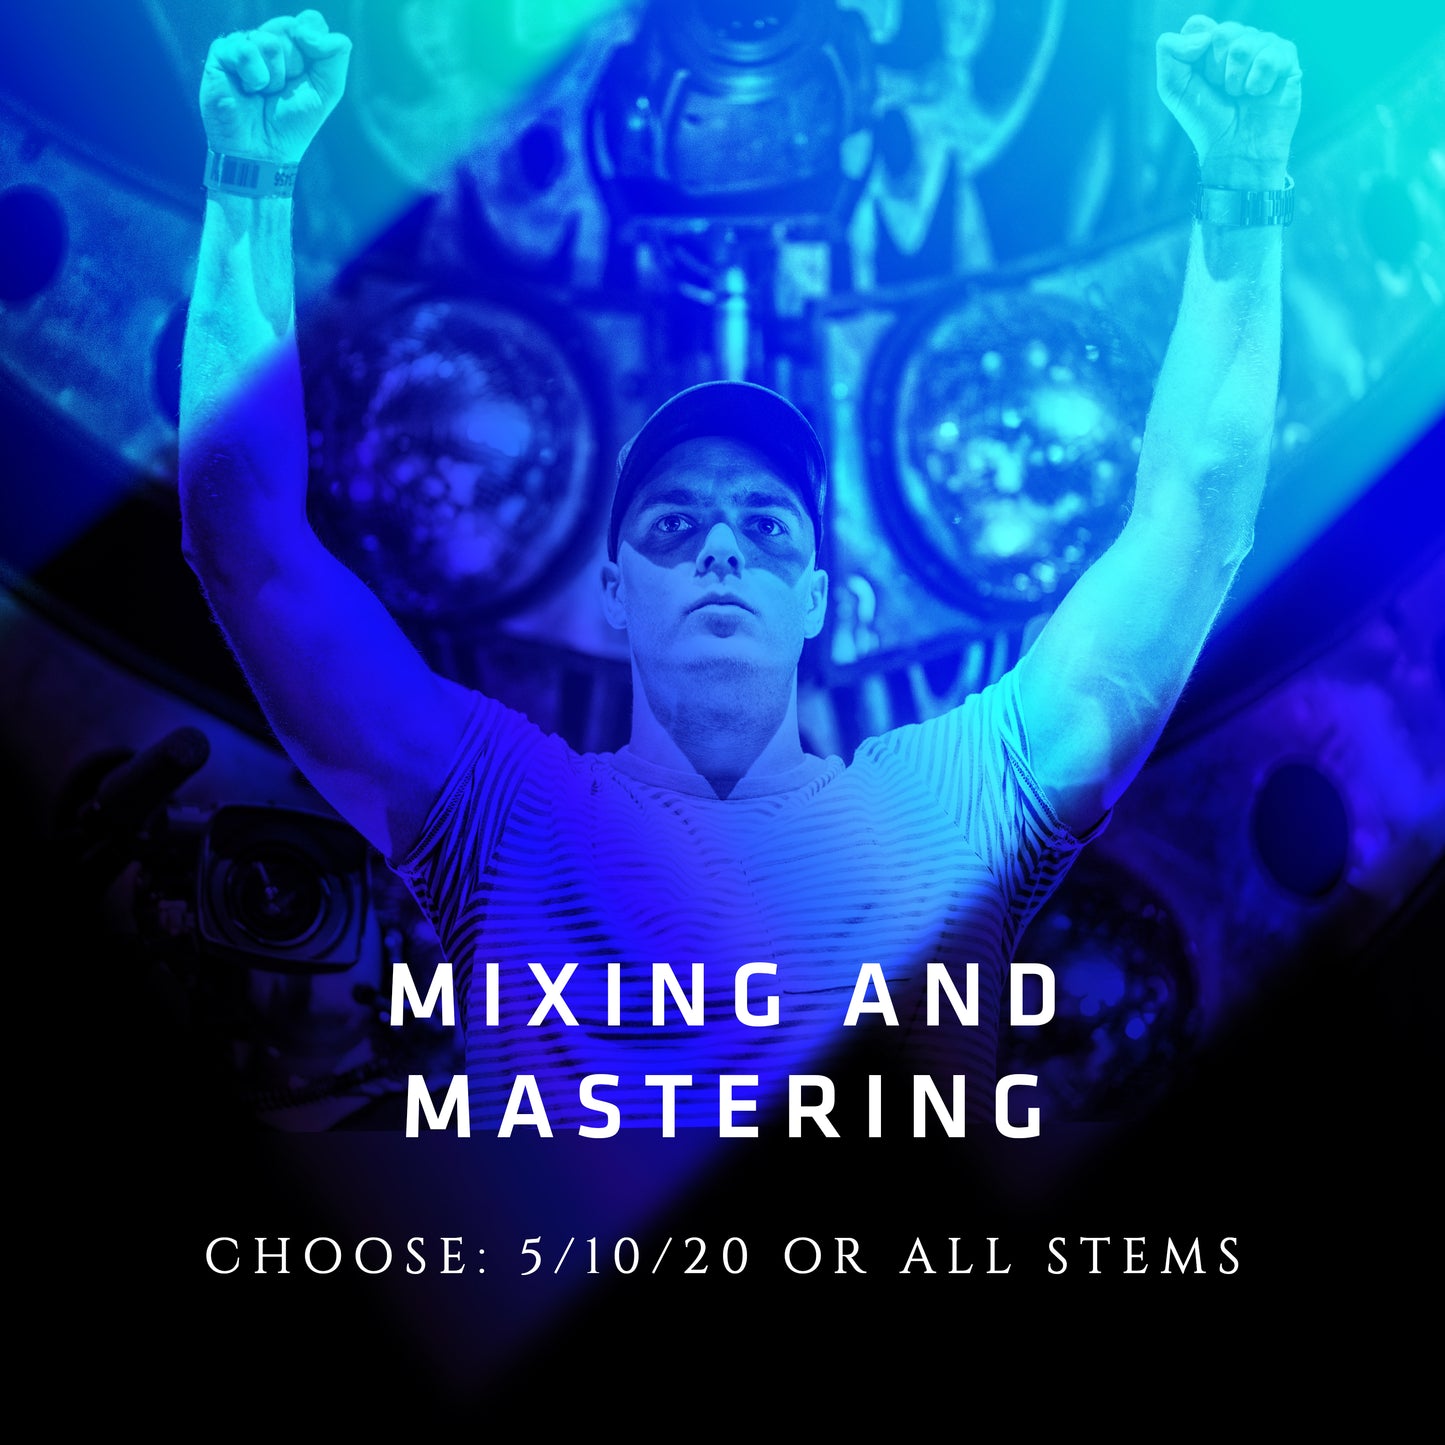 Mixing & mastering by MYST (5 Stems)